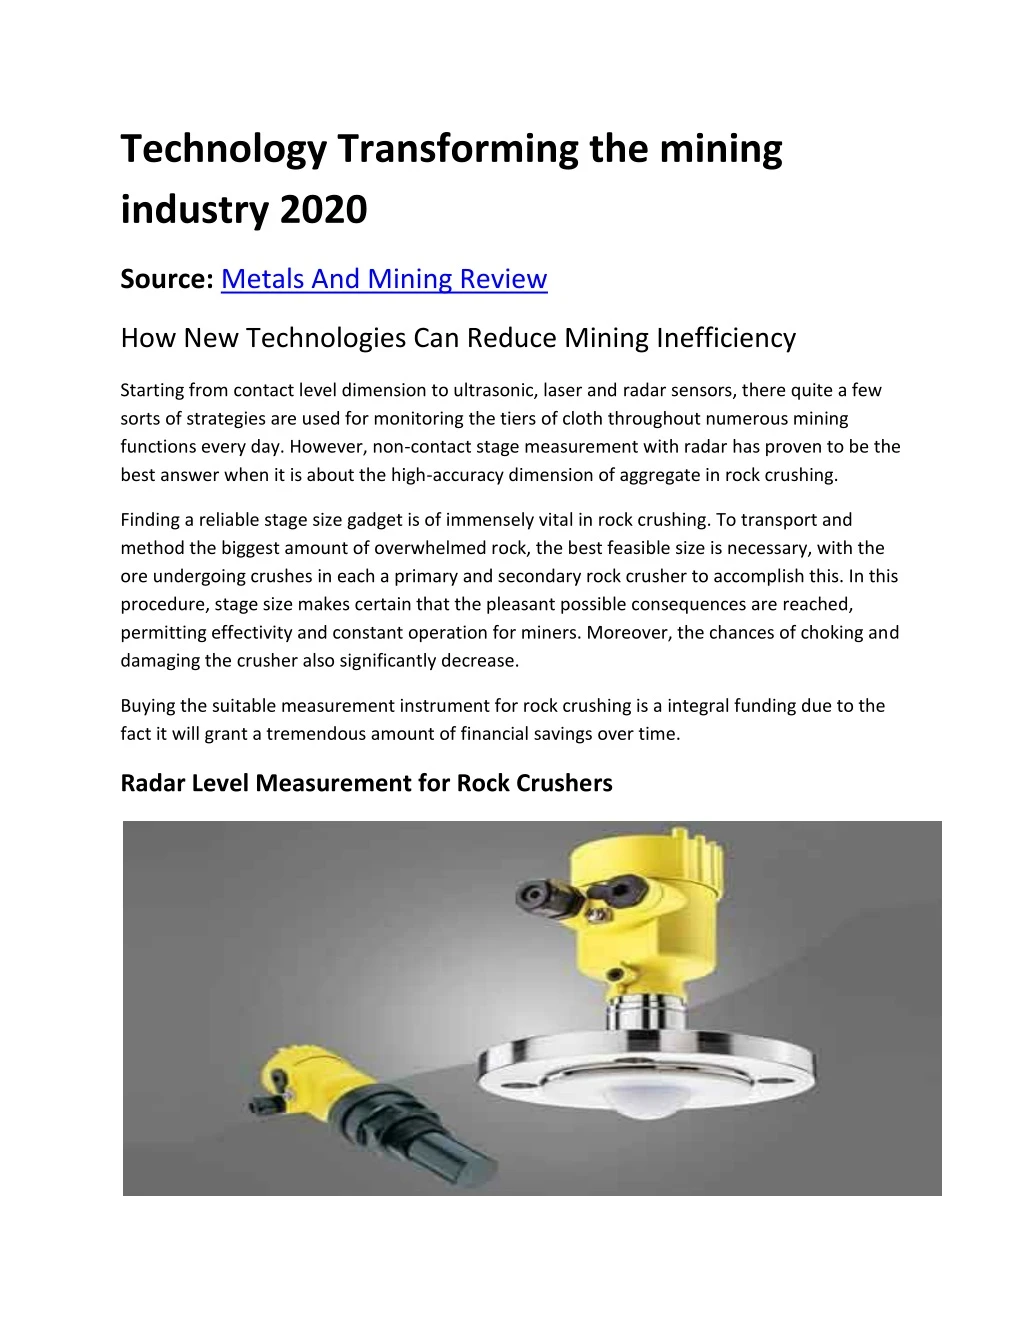 technology transforming the mining industry 2020